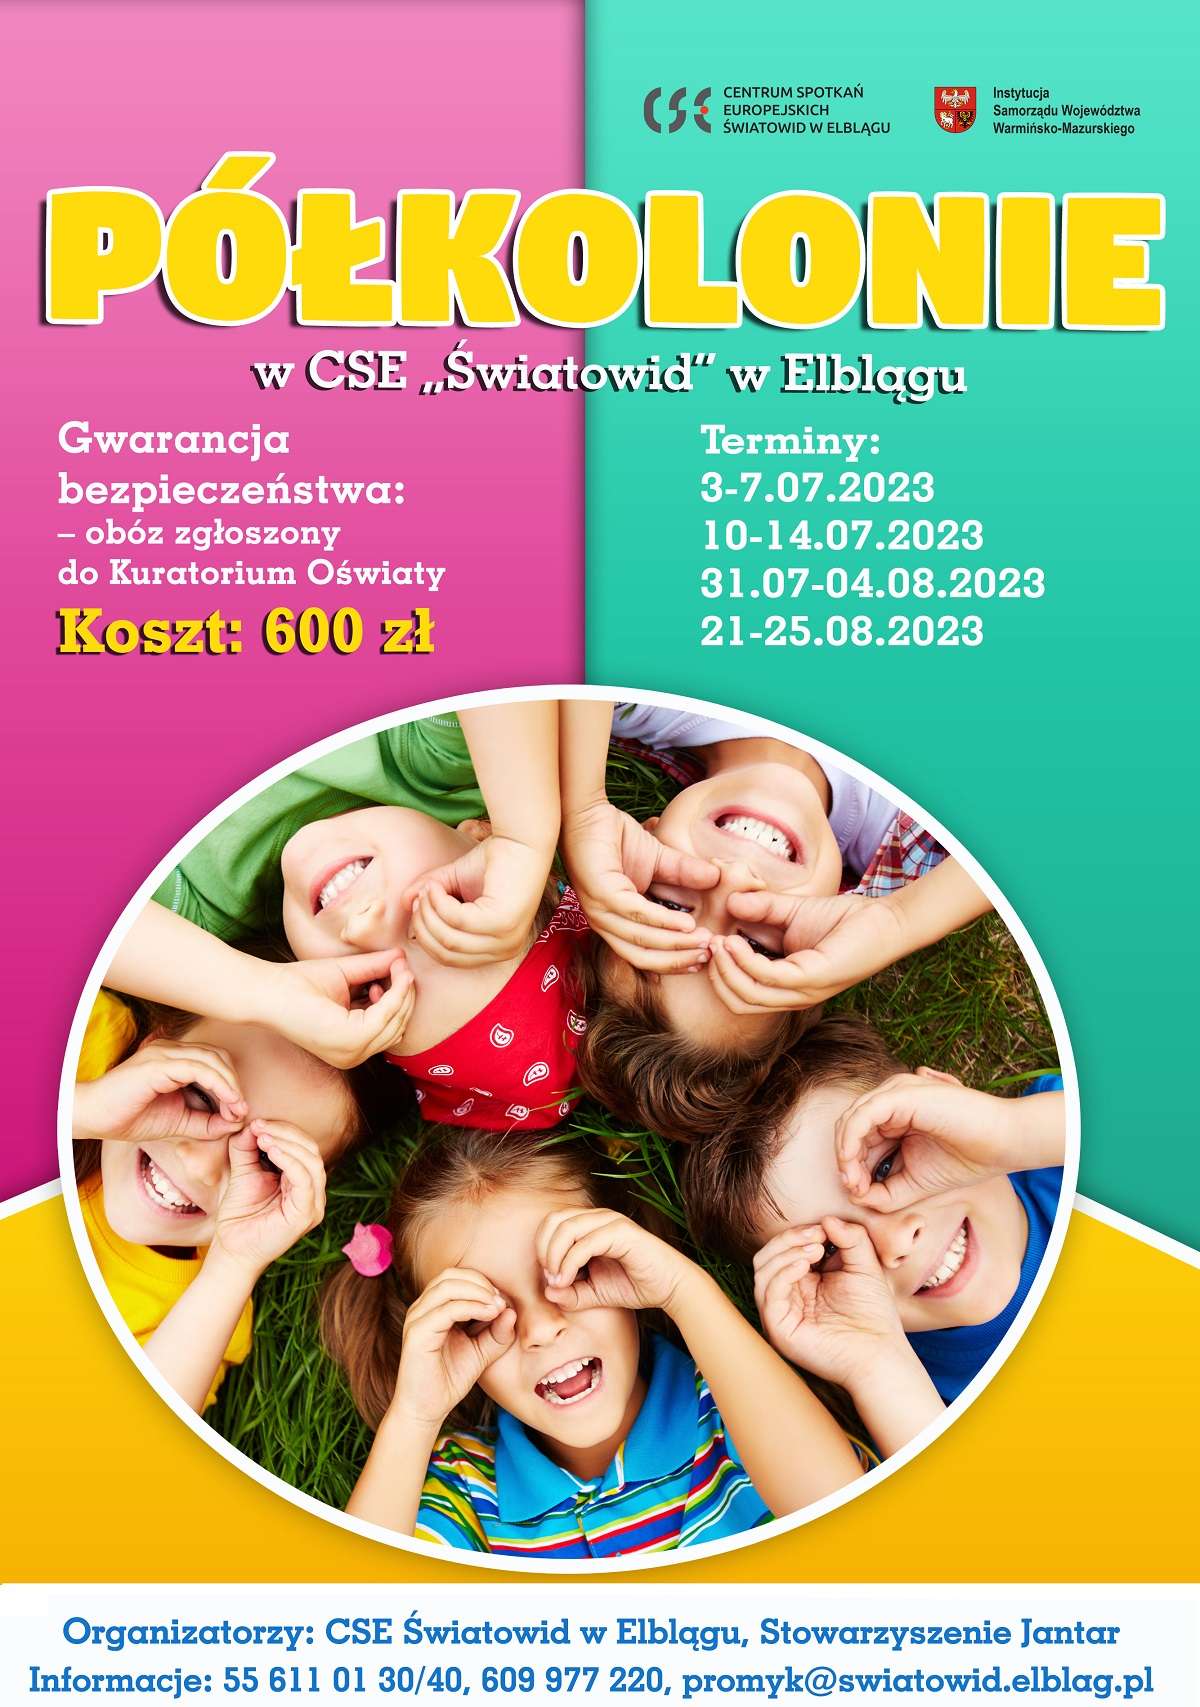 Day camps 2023 with CSE "Światowid" in Elbląg | check the offer!